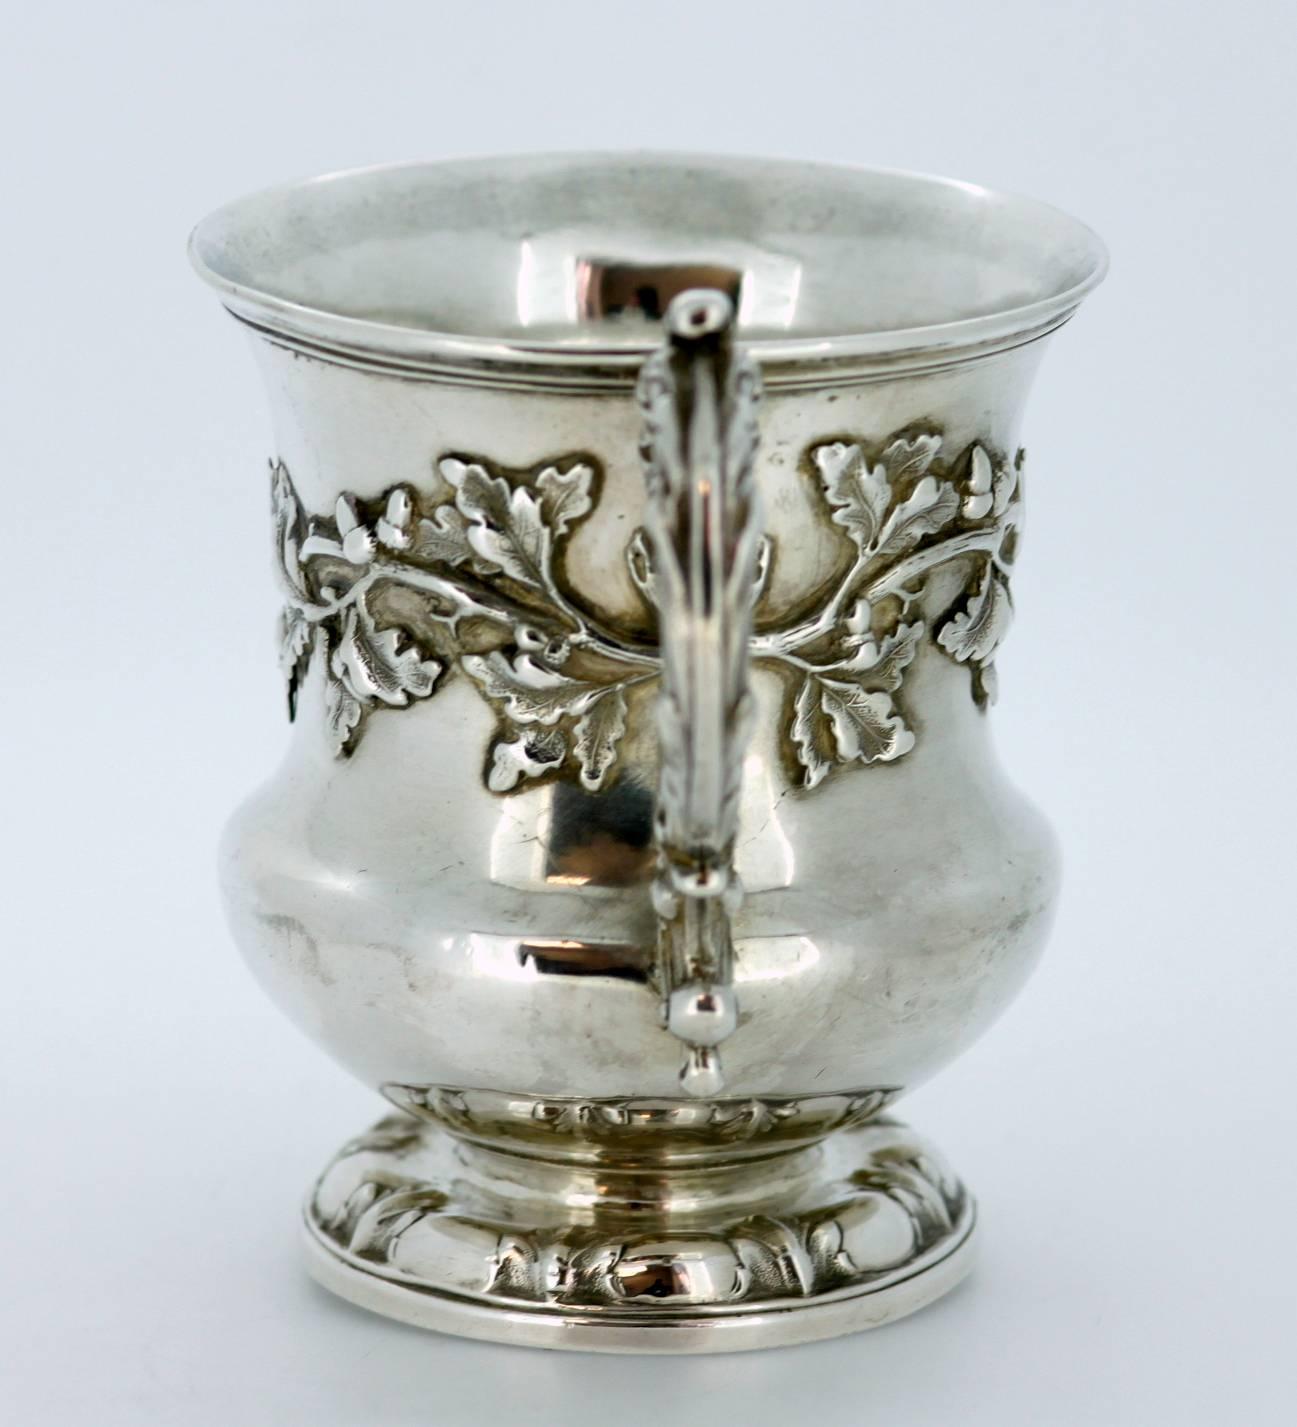 Antique solid silver cup with decorative engravings
Maker: Edward, Edward Junior, John & William Barnard
Made in London, 1832
Fully hallmarked. 

Dimensions: 
Size 11 x 8 x 10 cm 
Weight 164 grams.